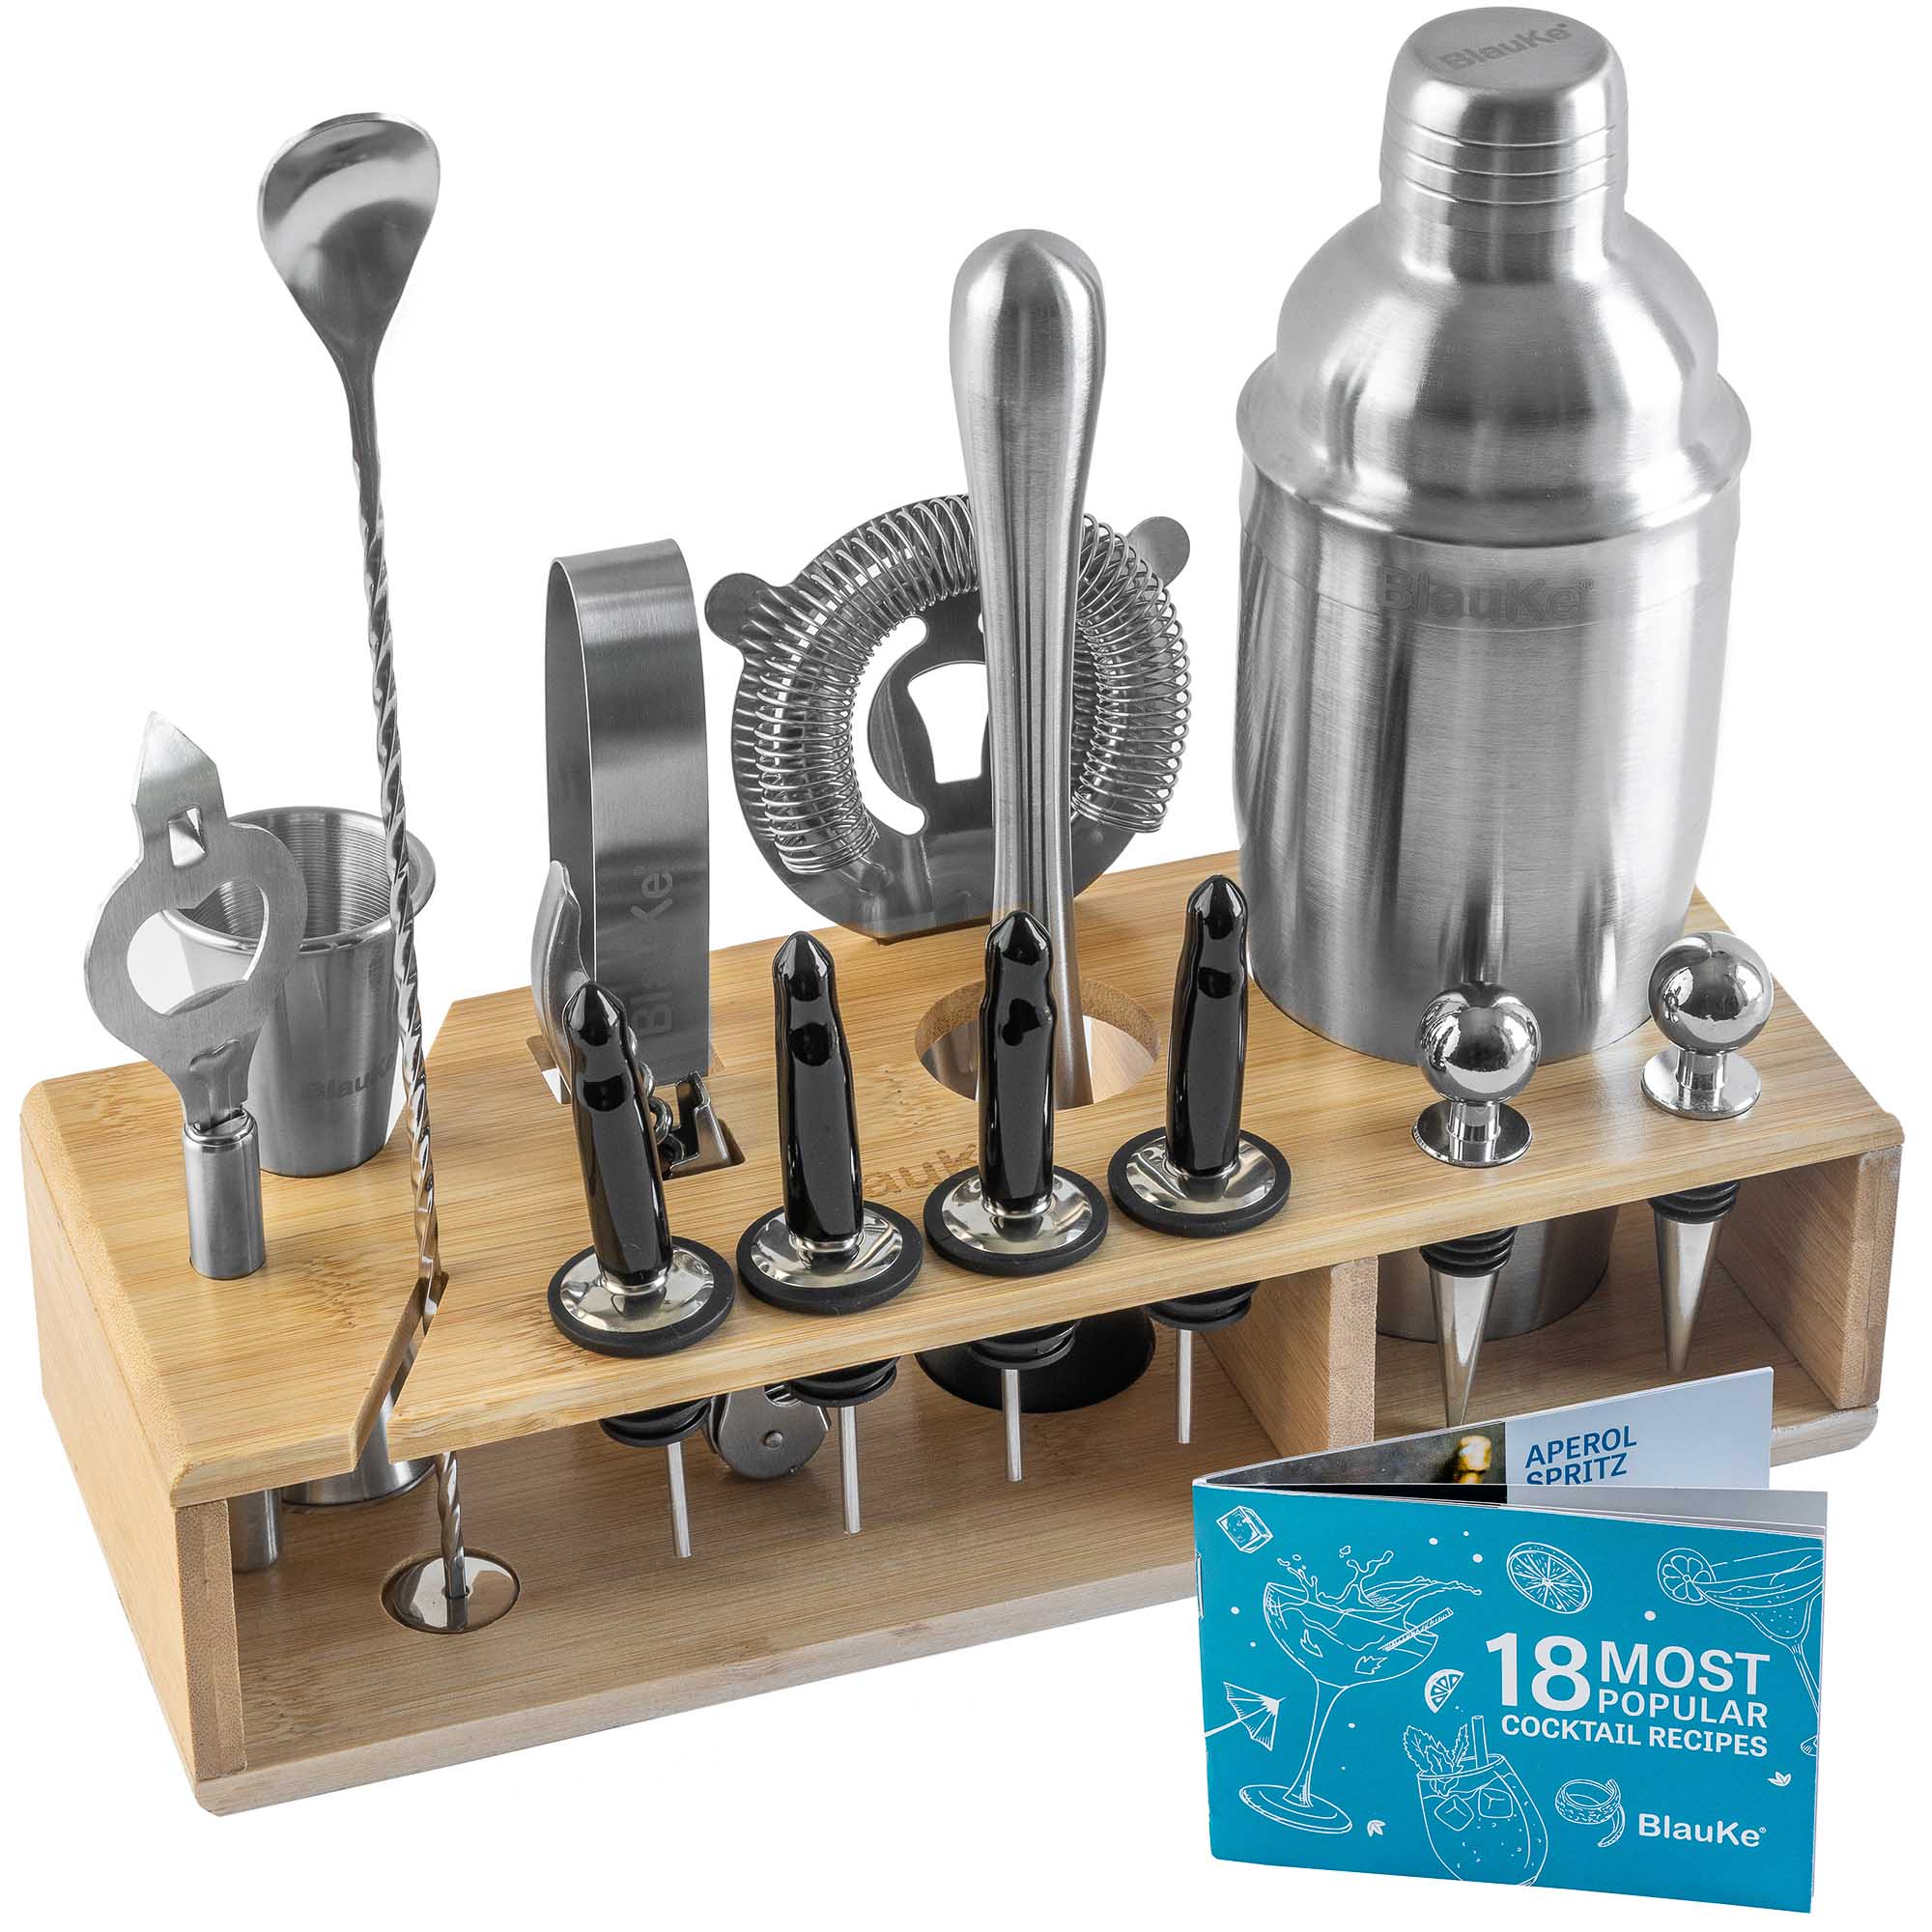 23-Piece Stainless Steel Cocktail Shaker Set with Stand & Recipes Booklet -  Professional Bartender Kit for Home, Bar, Party - Includes 4 Whiskey